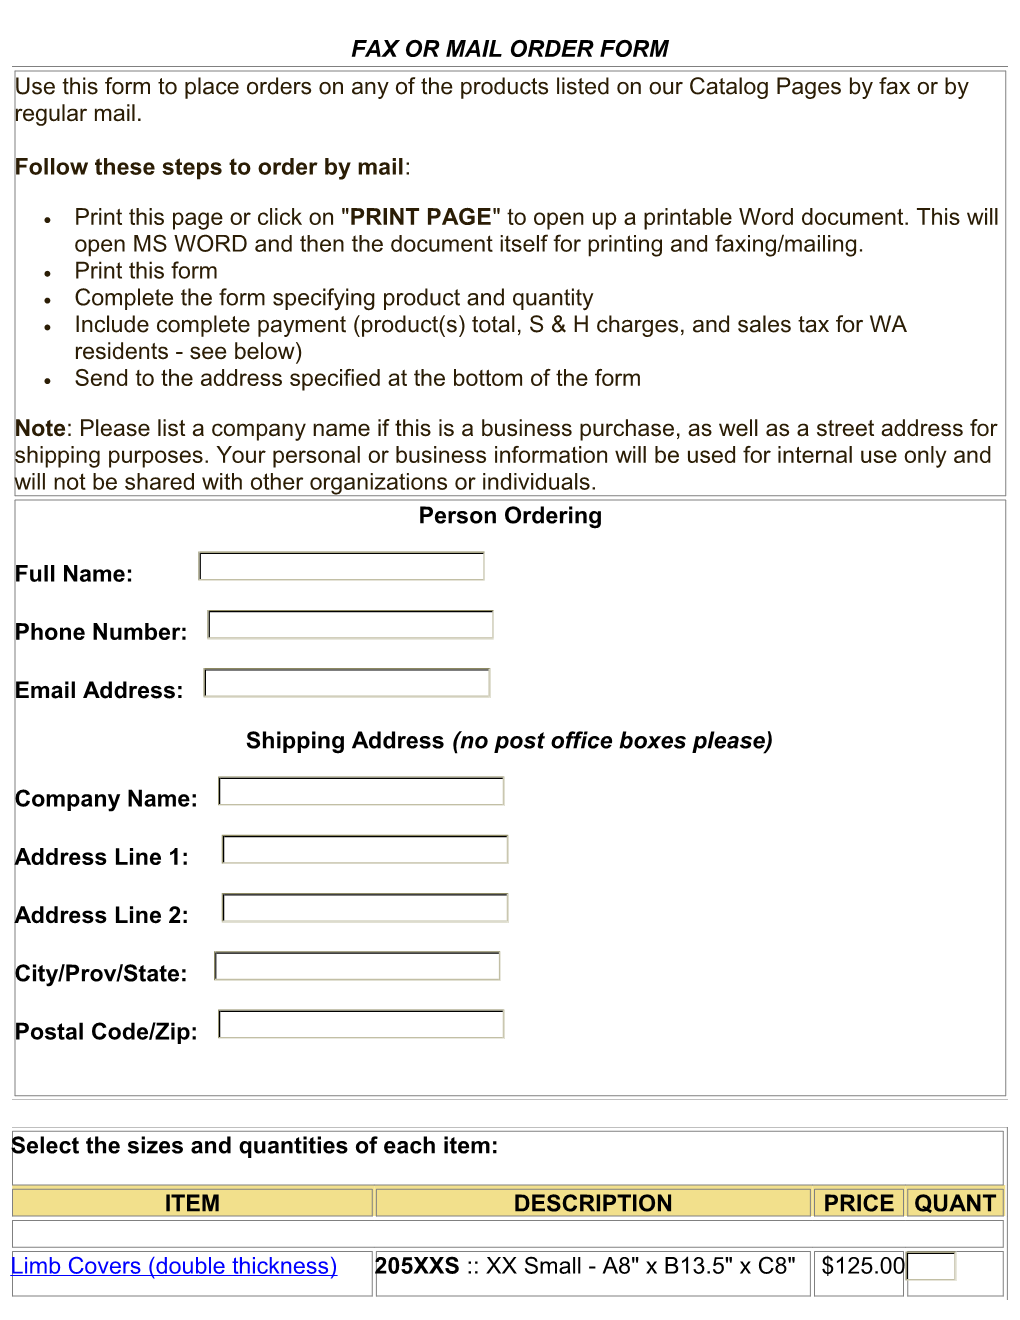 Form to Print and Fax Or Mail